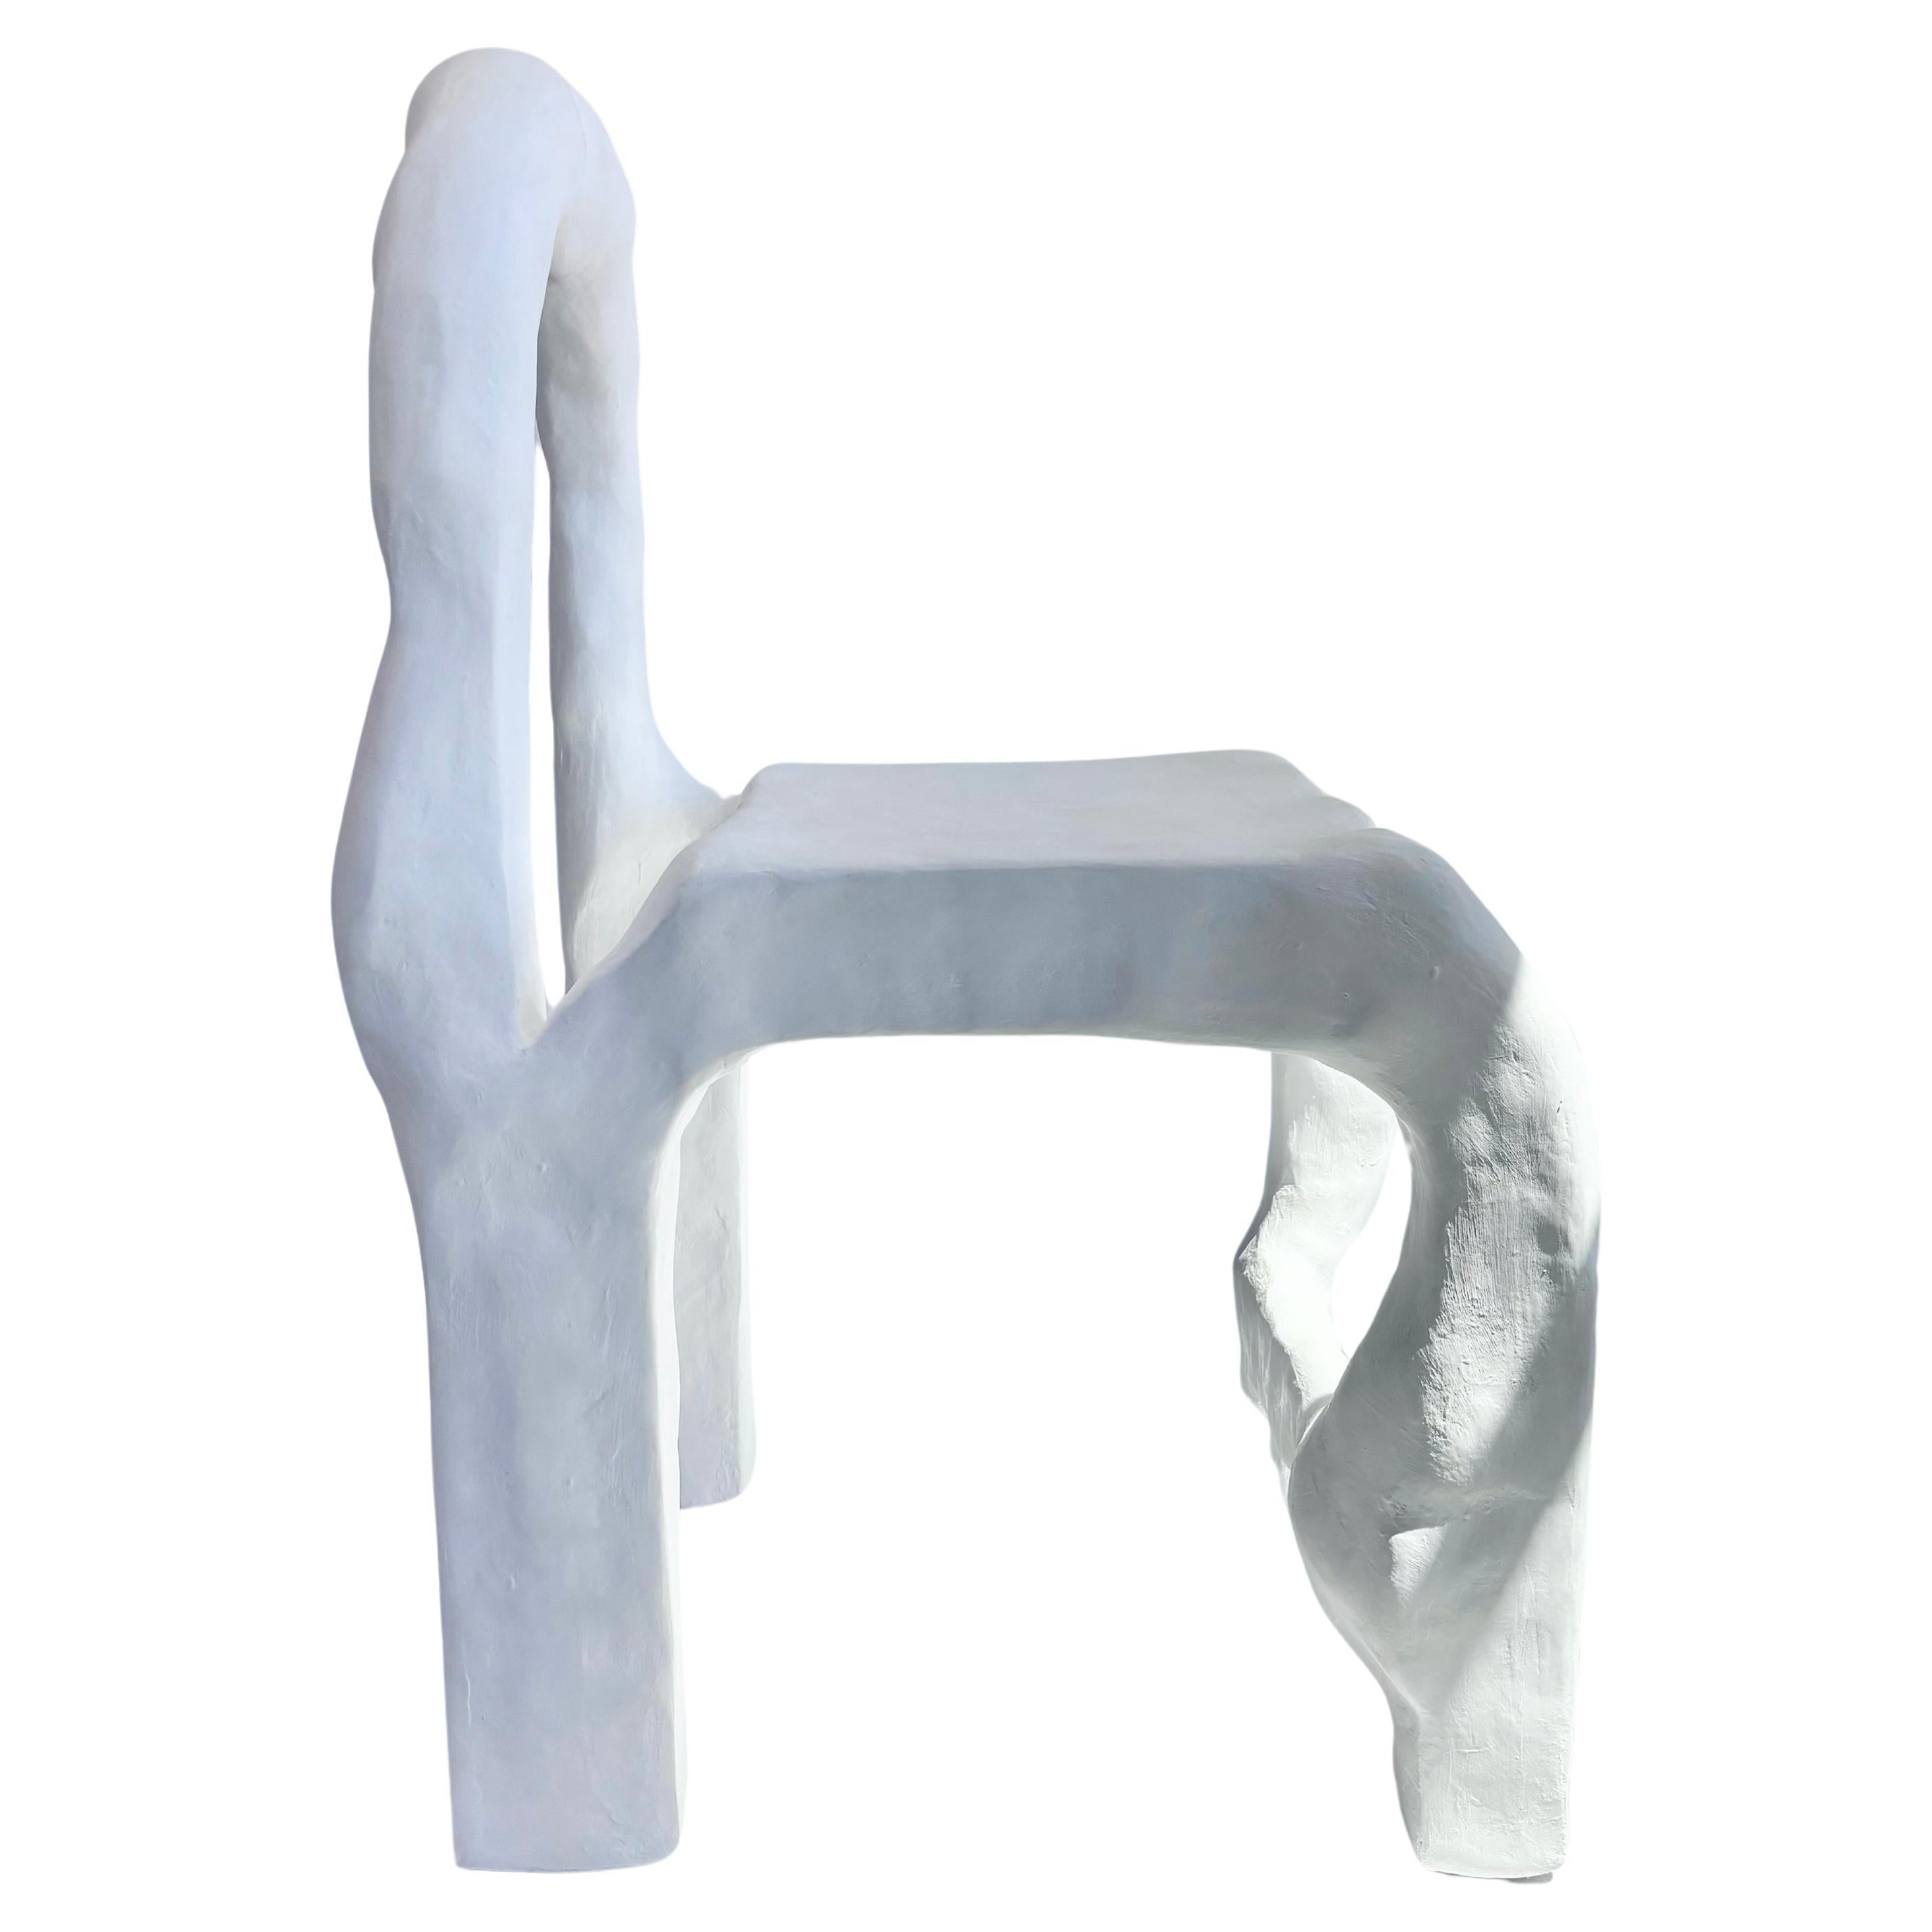 Contemporary Biomorphic Line by Studio Chora, Functional Sculpture, White Plaster Chair For Sale